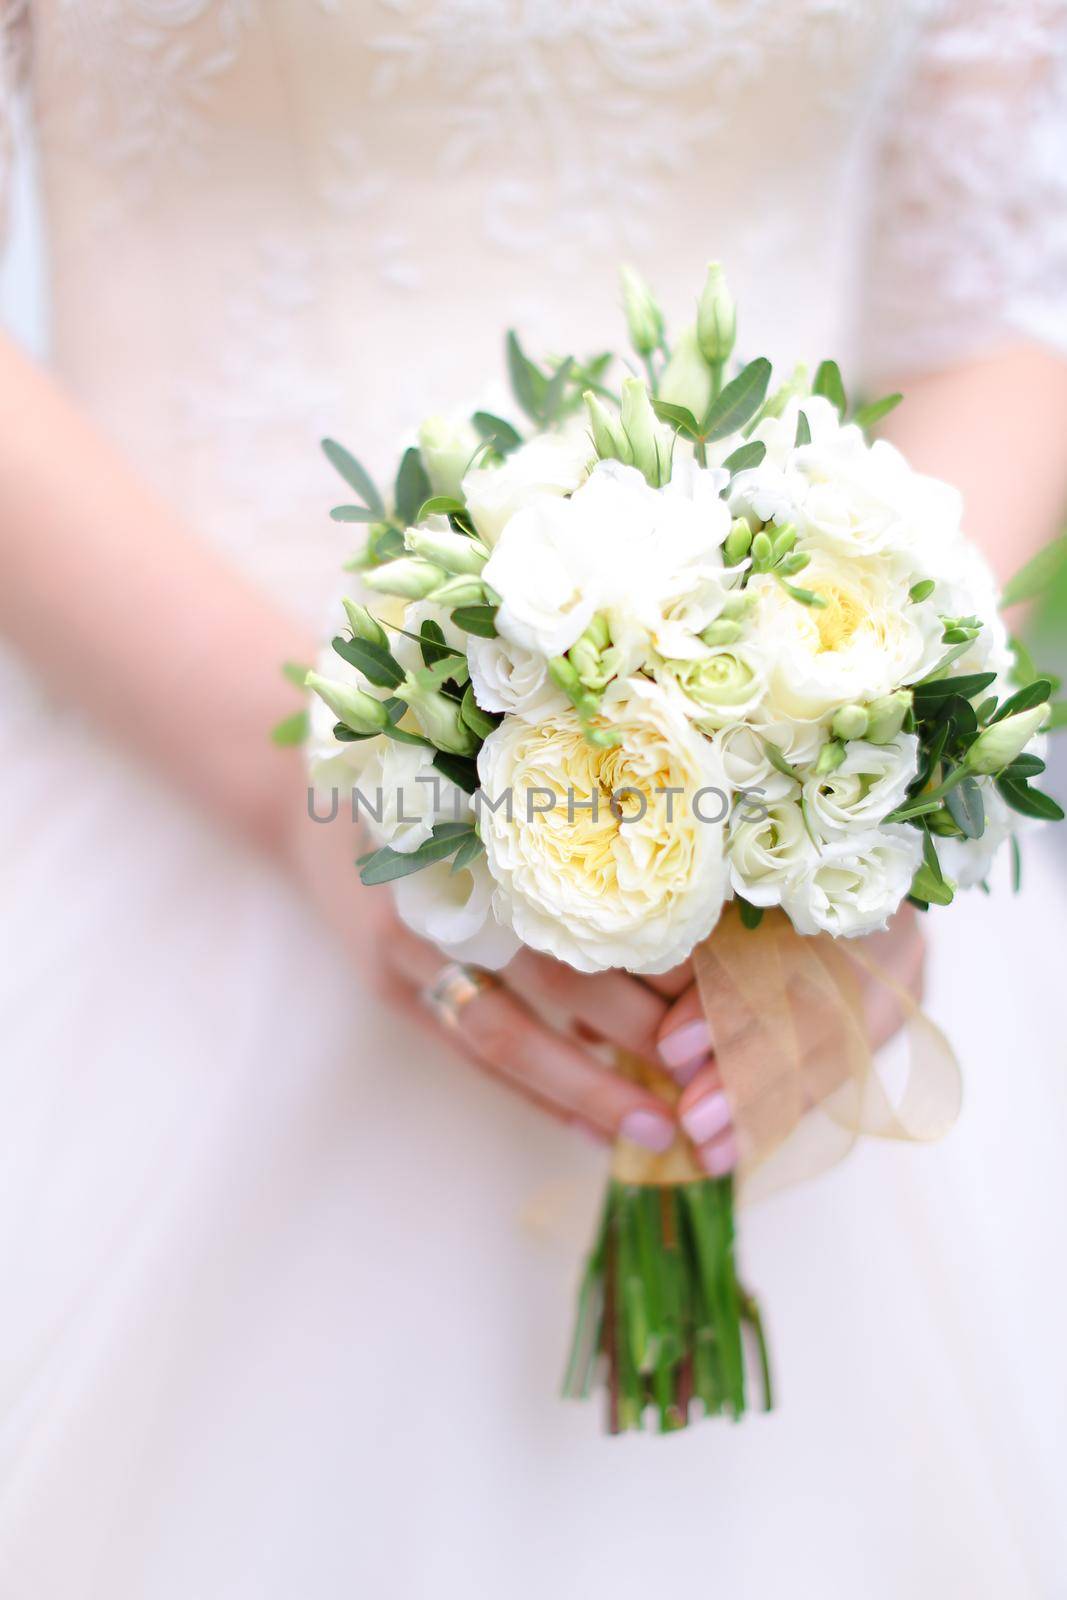 Closeup bride hands keeping white bouquet of flowers. Concept of wedding photo session.